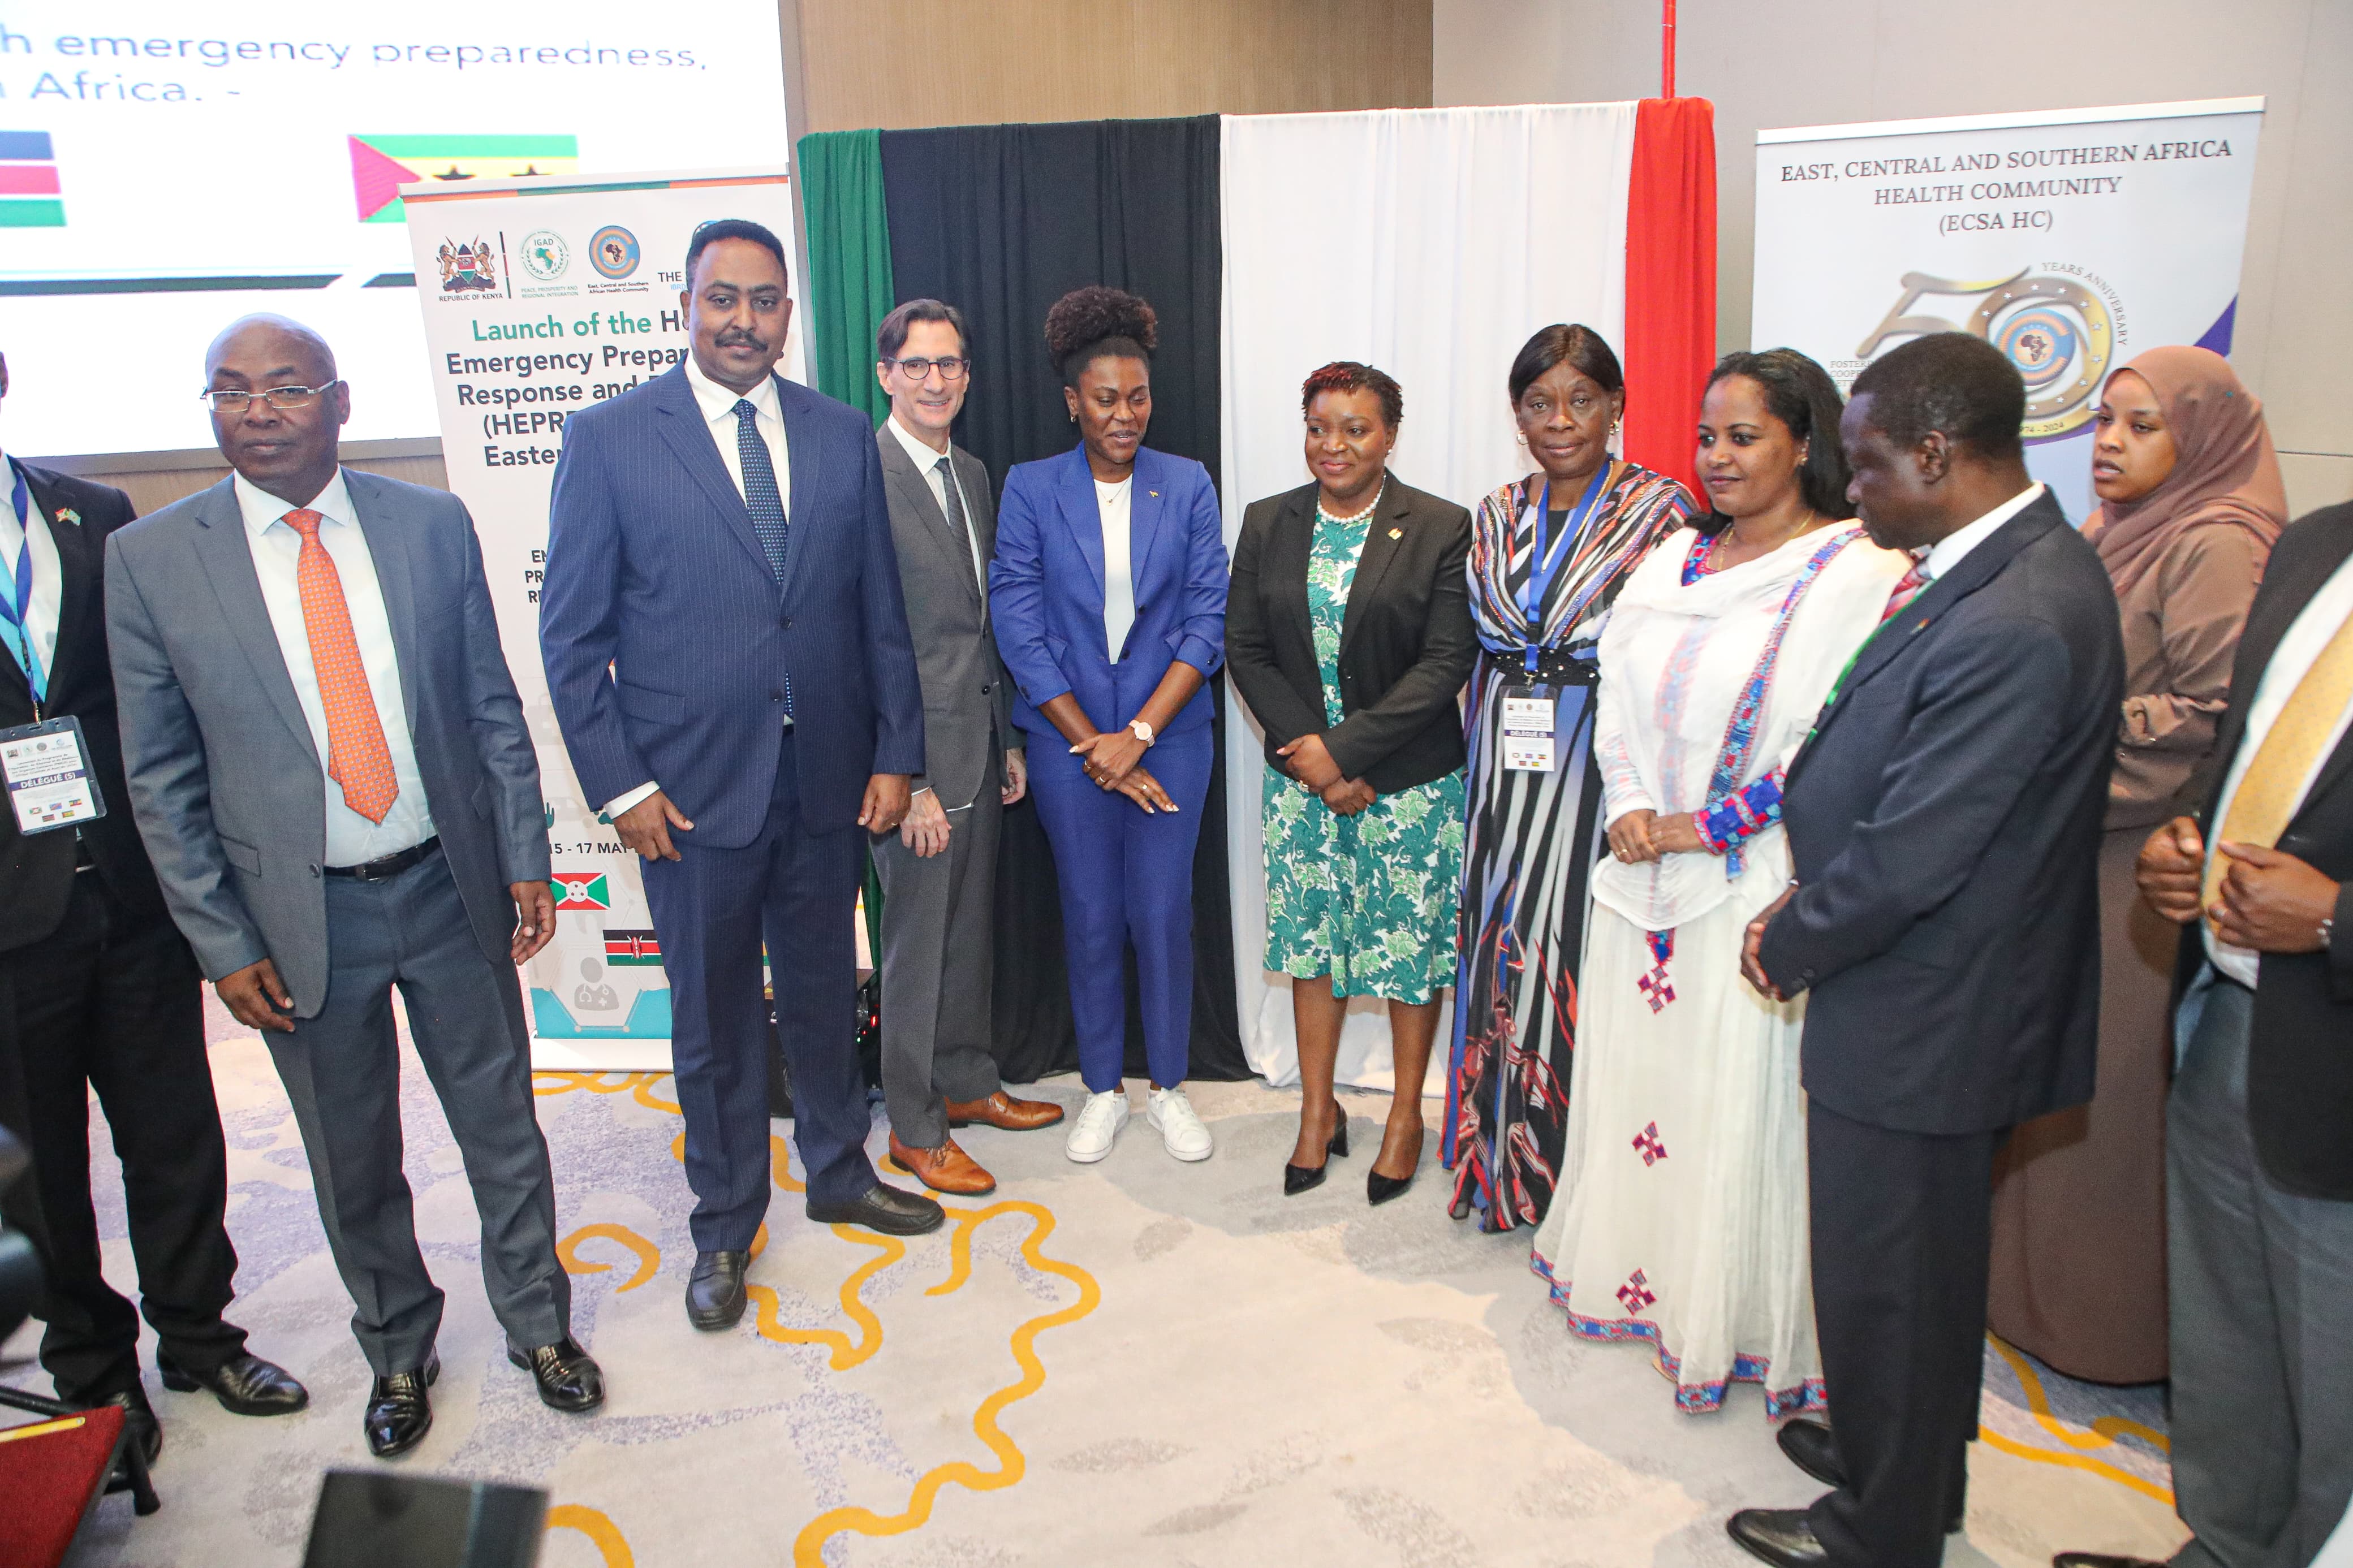 Ministry of Health Launches Health Emergency Preparedness, Response, and Resilience Project for Eastern and Southern Africa